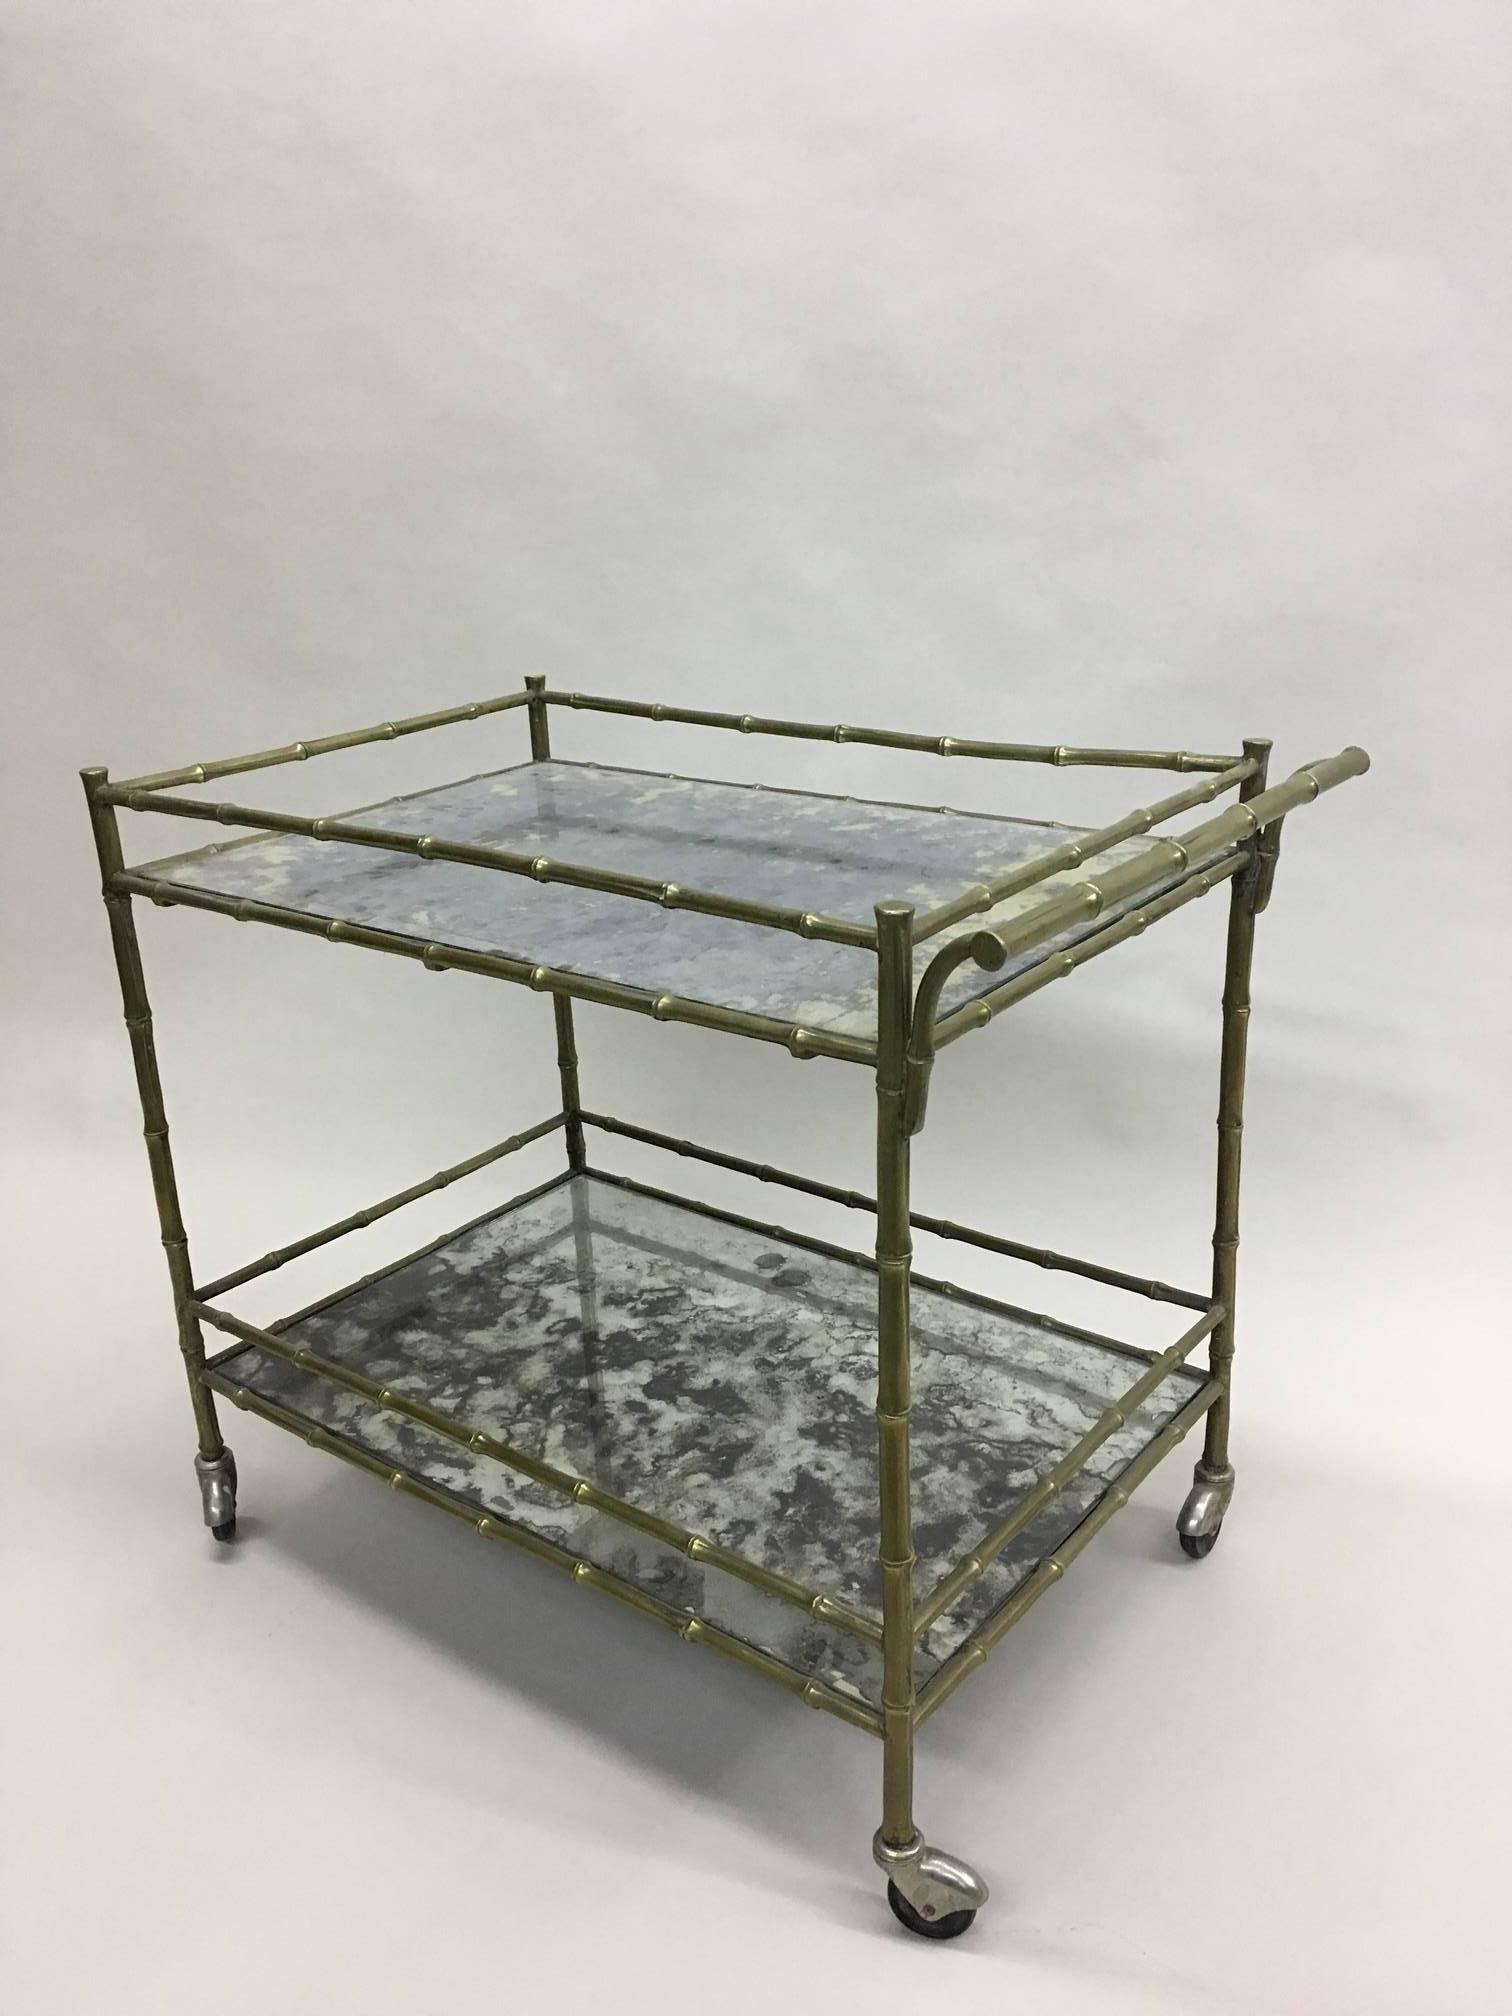 An elegant French midcentury solid brass / bronze faux bamboo tea cart / bar cart with mercury glass mirrored tops by Maison Baguès embracing modern and neoclassical traditions. The piece has fine details and a solid feel.